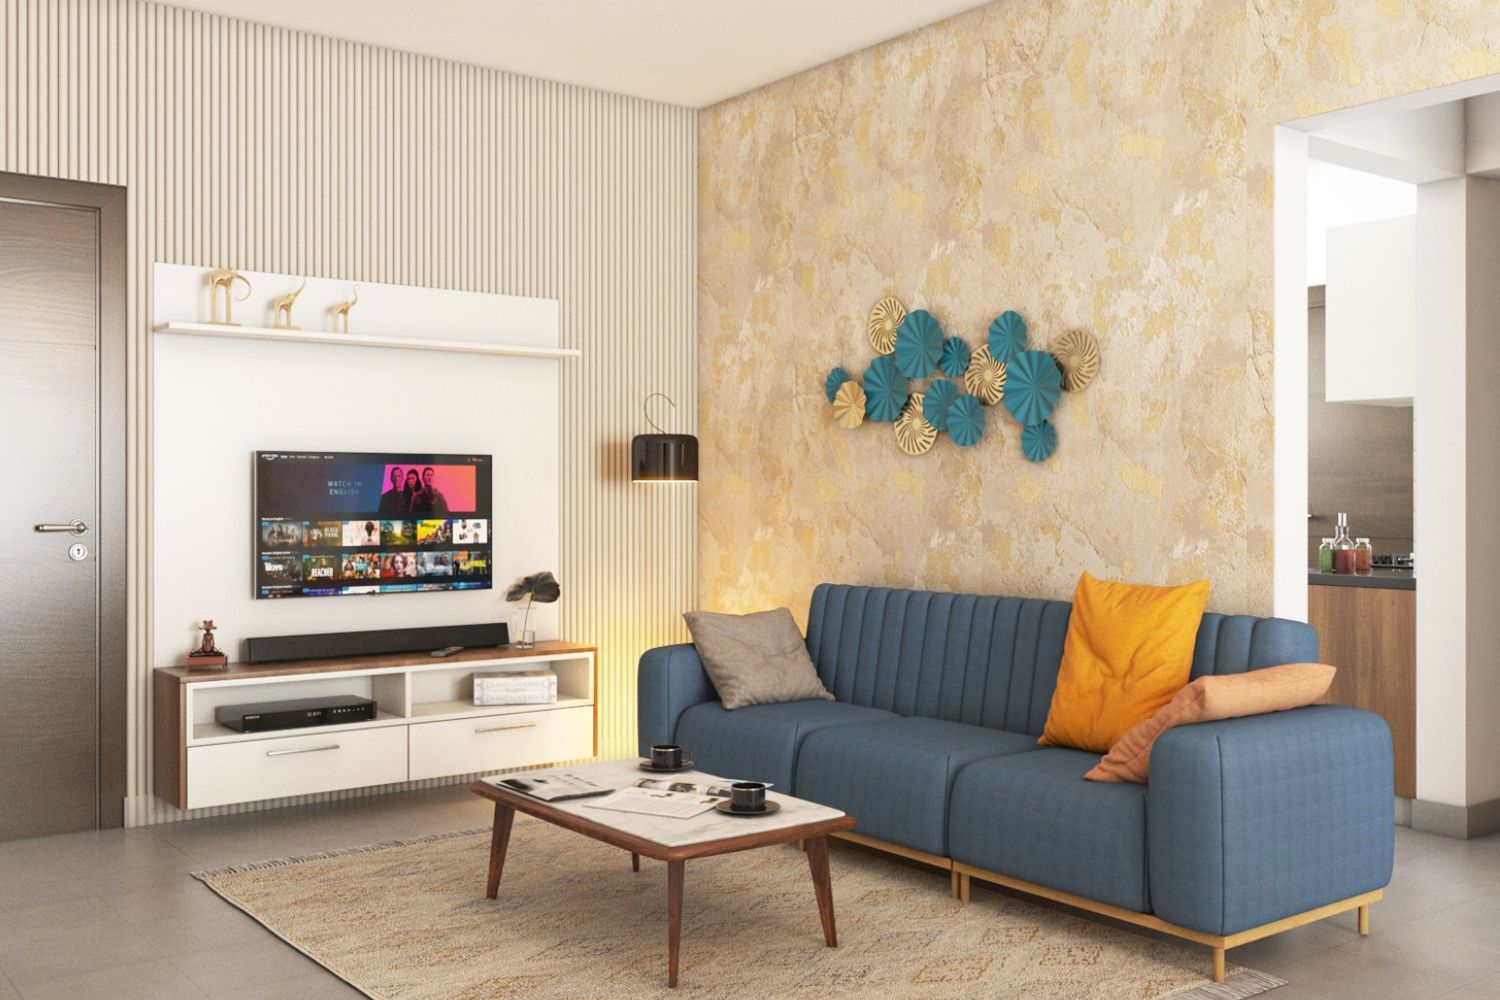 Contemporary Living Room Design With Beige And Gold Textured Wallpaper And Blue Sofa